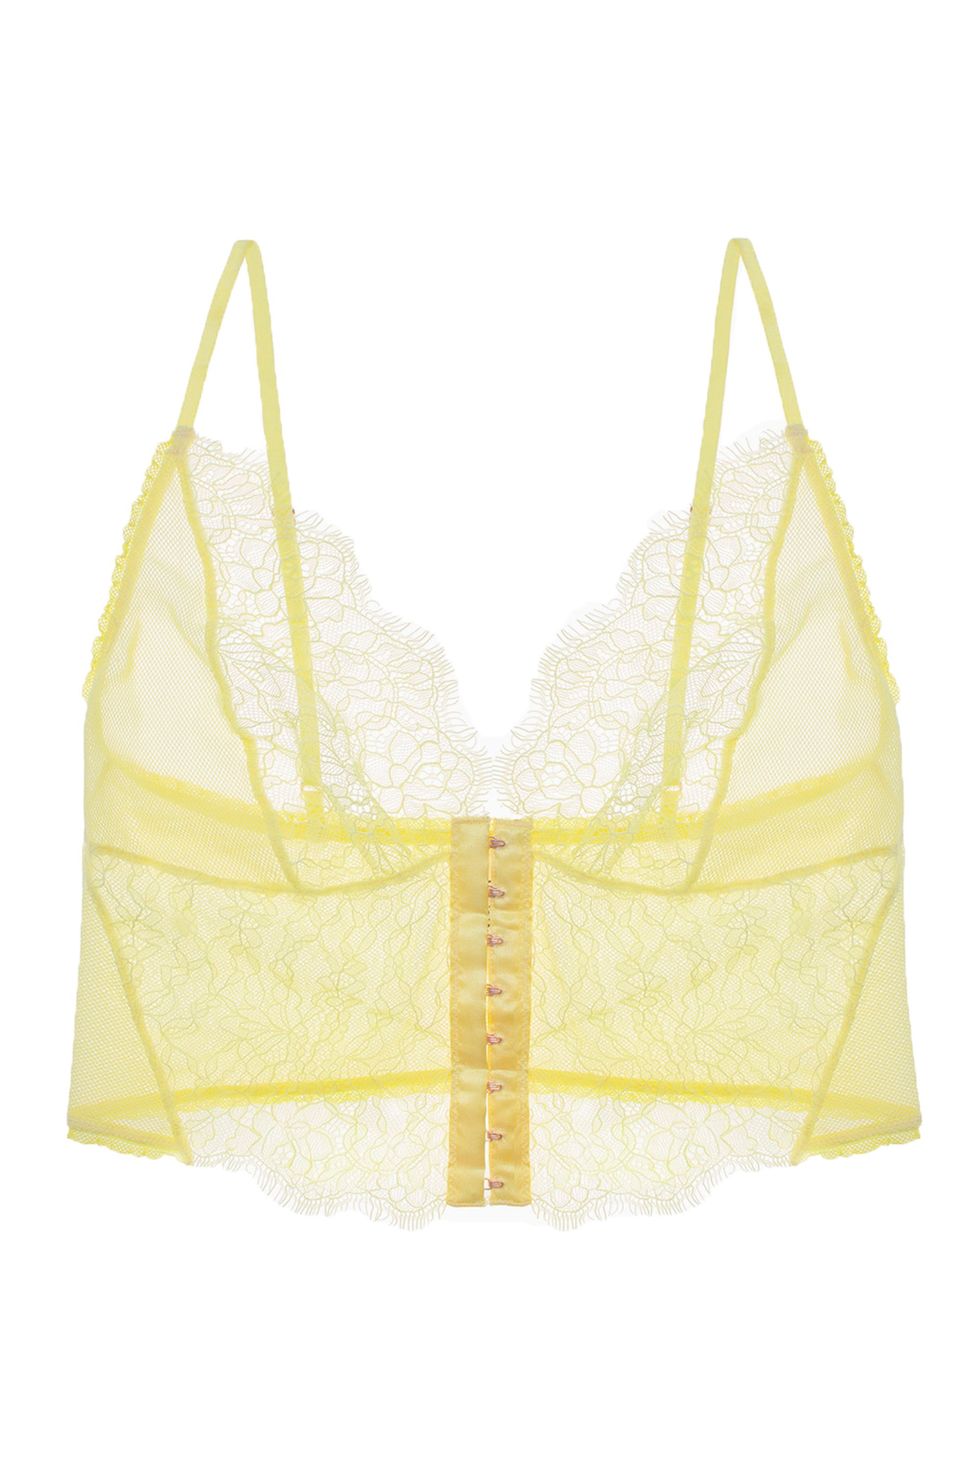 Neon Eve bralette by Playful Promises